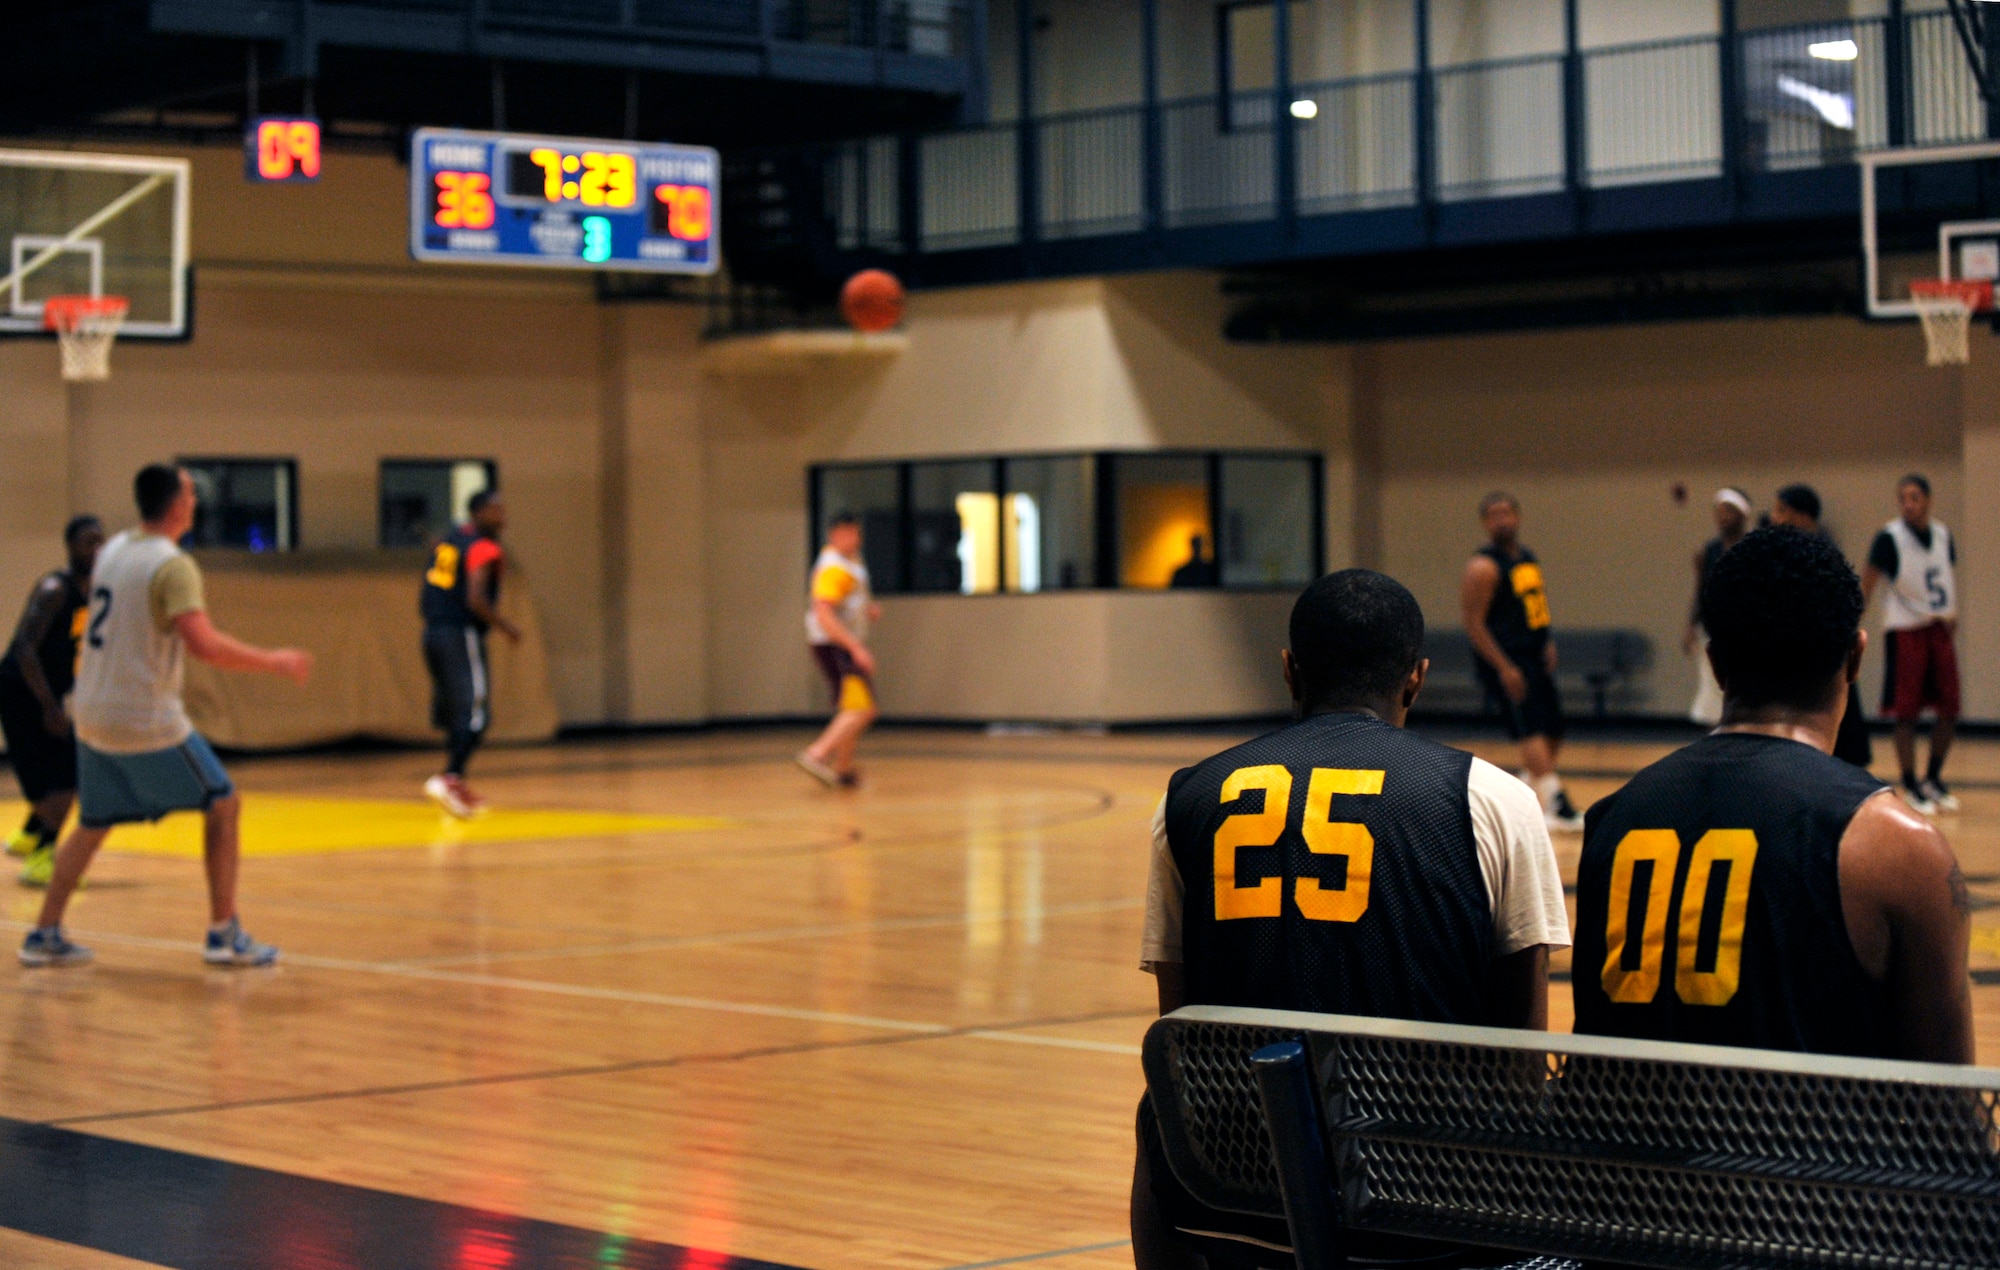 Team members of the Army National Guard watch the final seven minutes of the 7:30 p.m. intramural basketball game Jan. 15, 2015, at Little Rock Air Force Base, Ark. Each Monday, Tuesday, Wednesday and Thursday, games are played at 5:30, 6:30 and 7:30 p.m. (U.S. Air Force photo by Senior Airman Stephanie Serrano) 